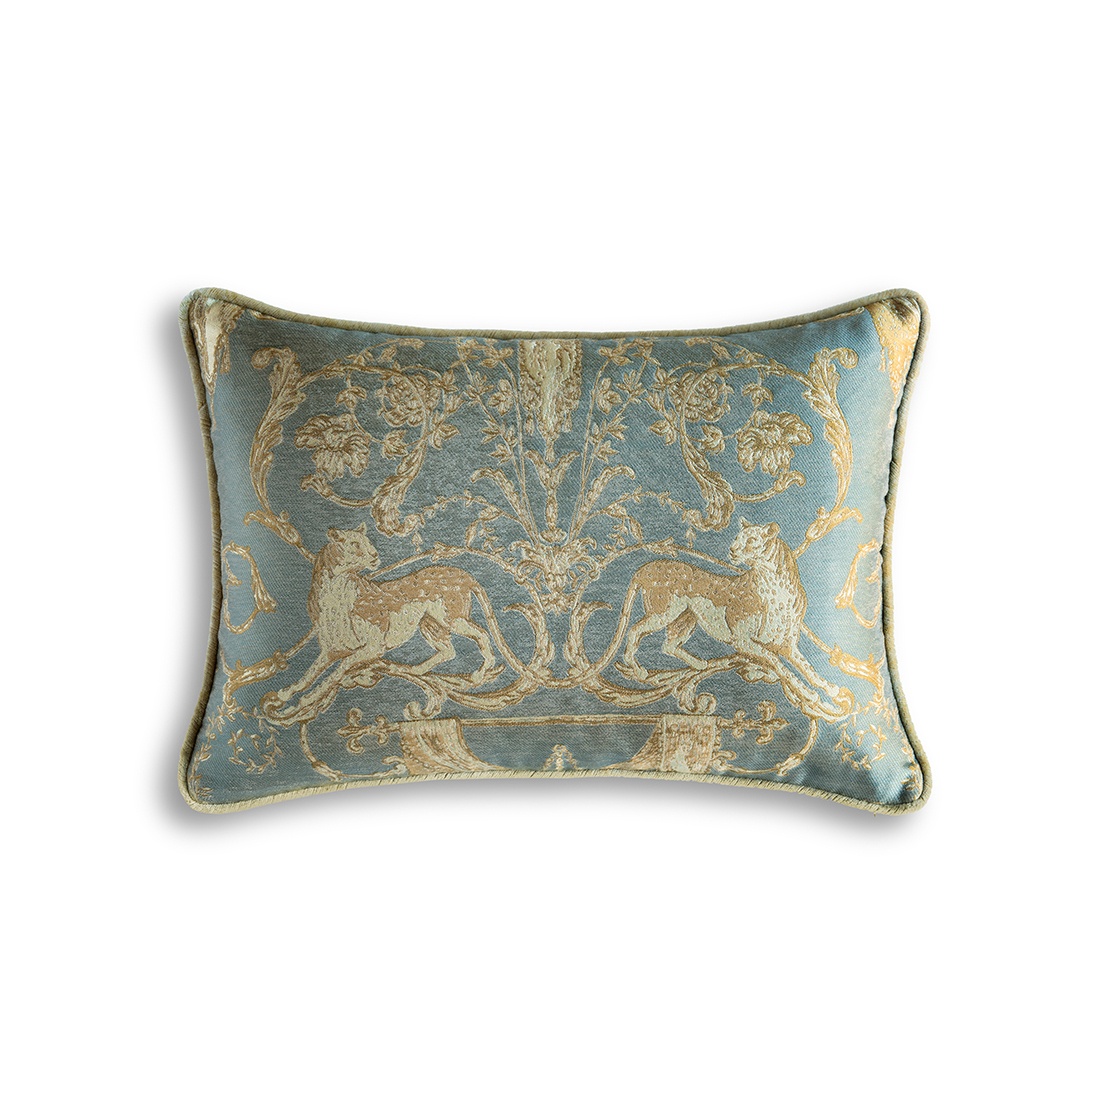 Lawrence cushion in Neptune - Beaumont & Fletcher